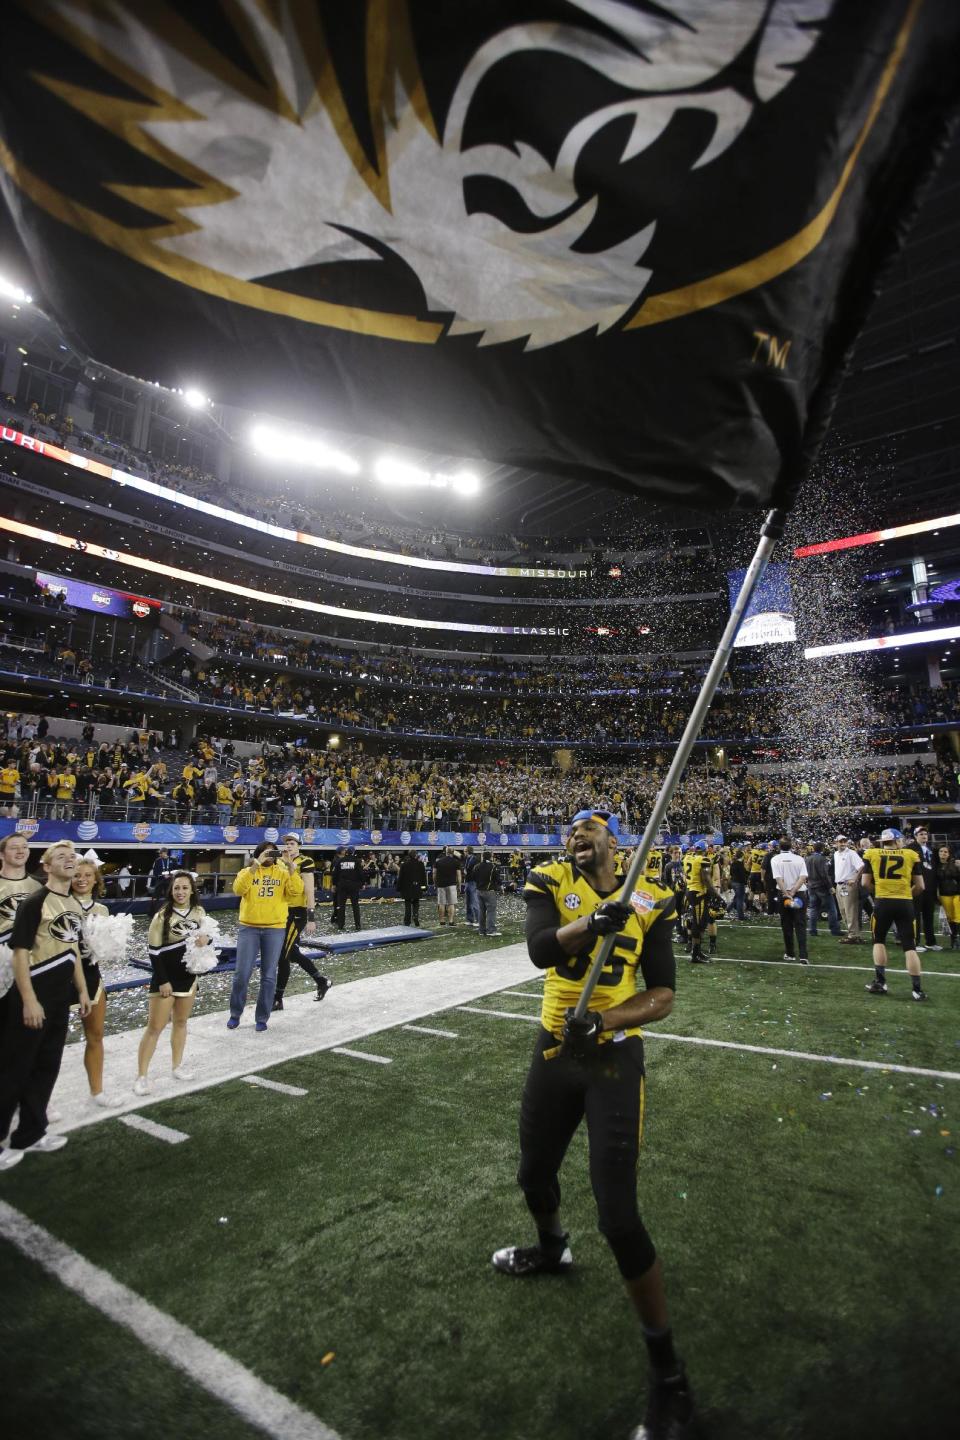 Missouri wide receiver Marcus Lucas (85) waves the school's flag after the Cotton Bowl NCAA college football game against Oklahoma State, Friday, Jan. 3, 2014, in Arlington, Texas. Missouri won 41-31. (AP Photo/Tim Sharp)